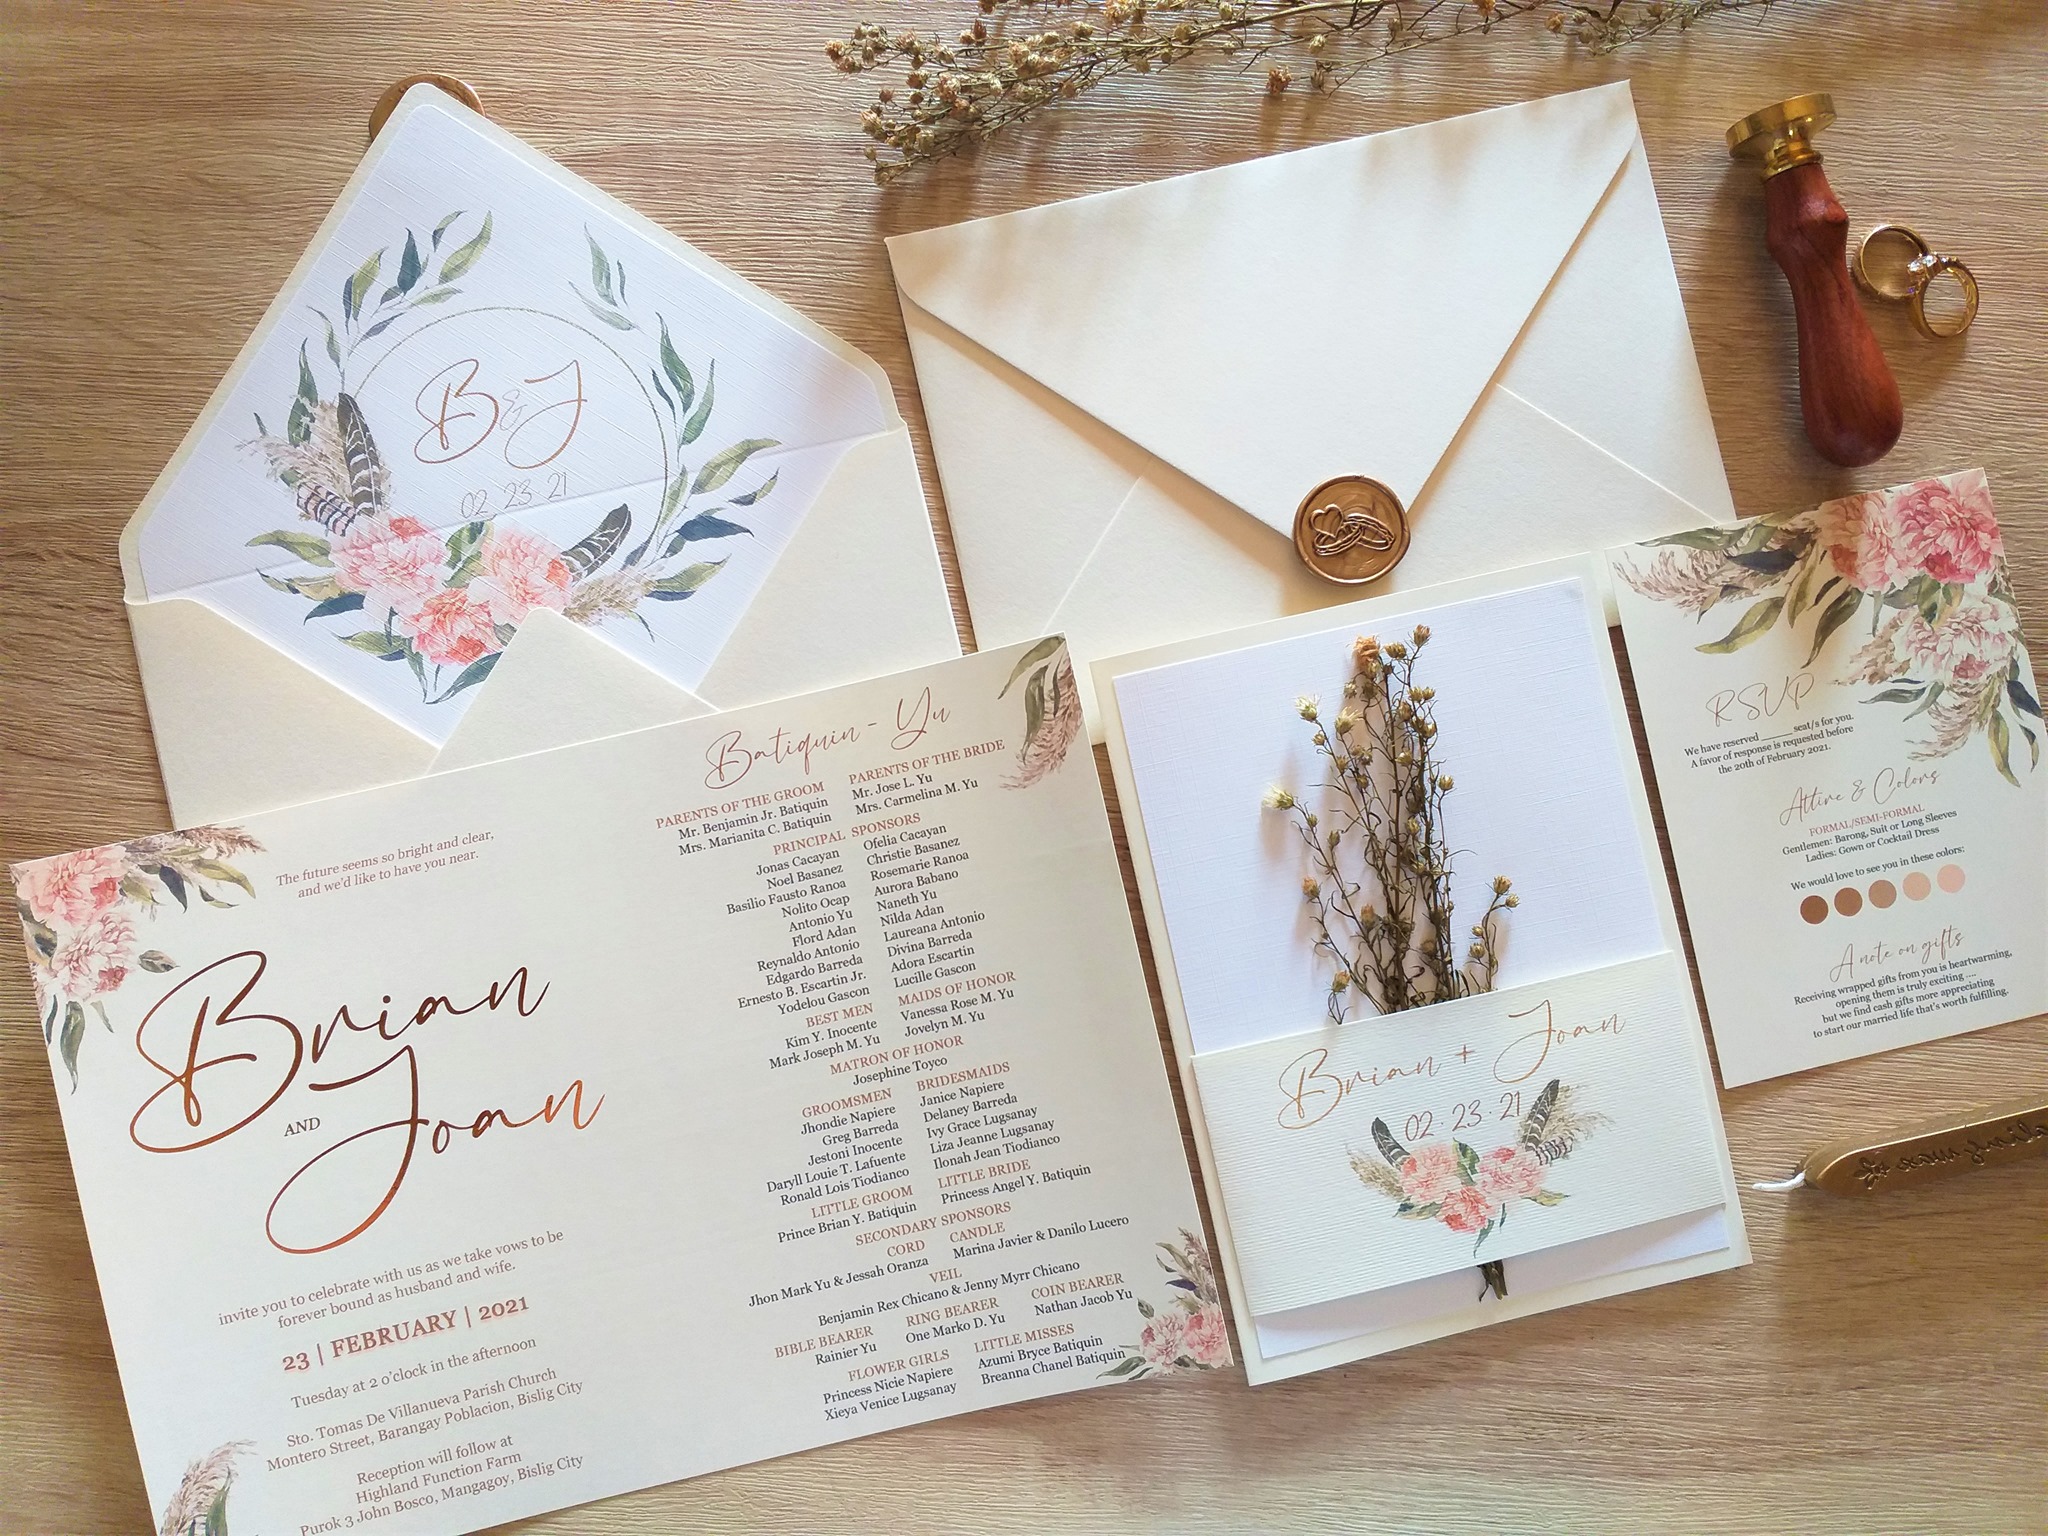 Cardfold Style Foiled Wedding Invite with Dried Flowers